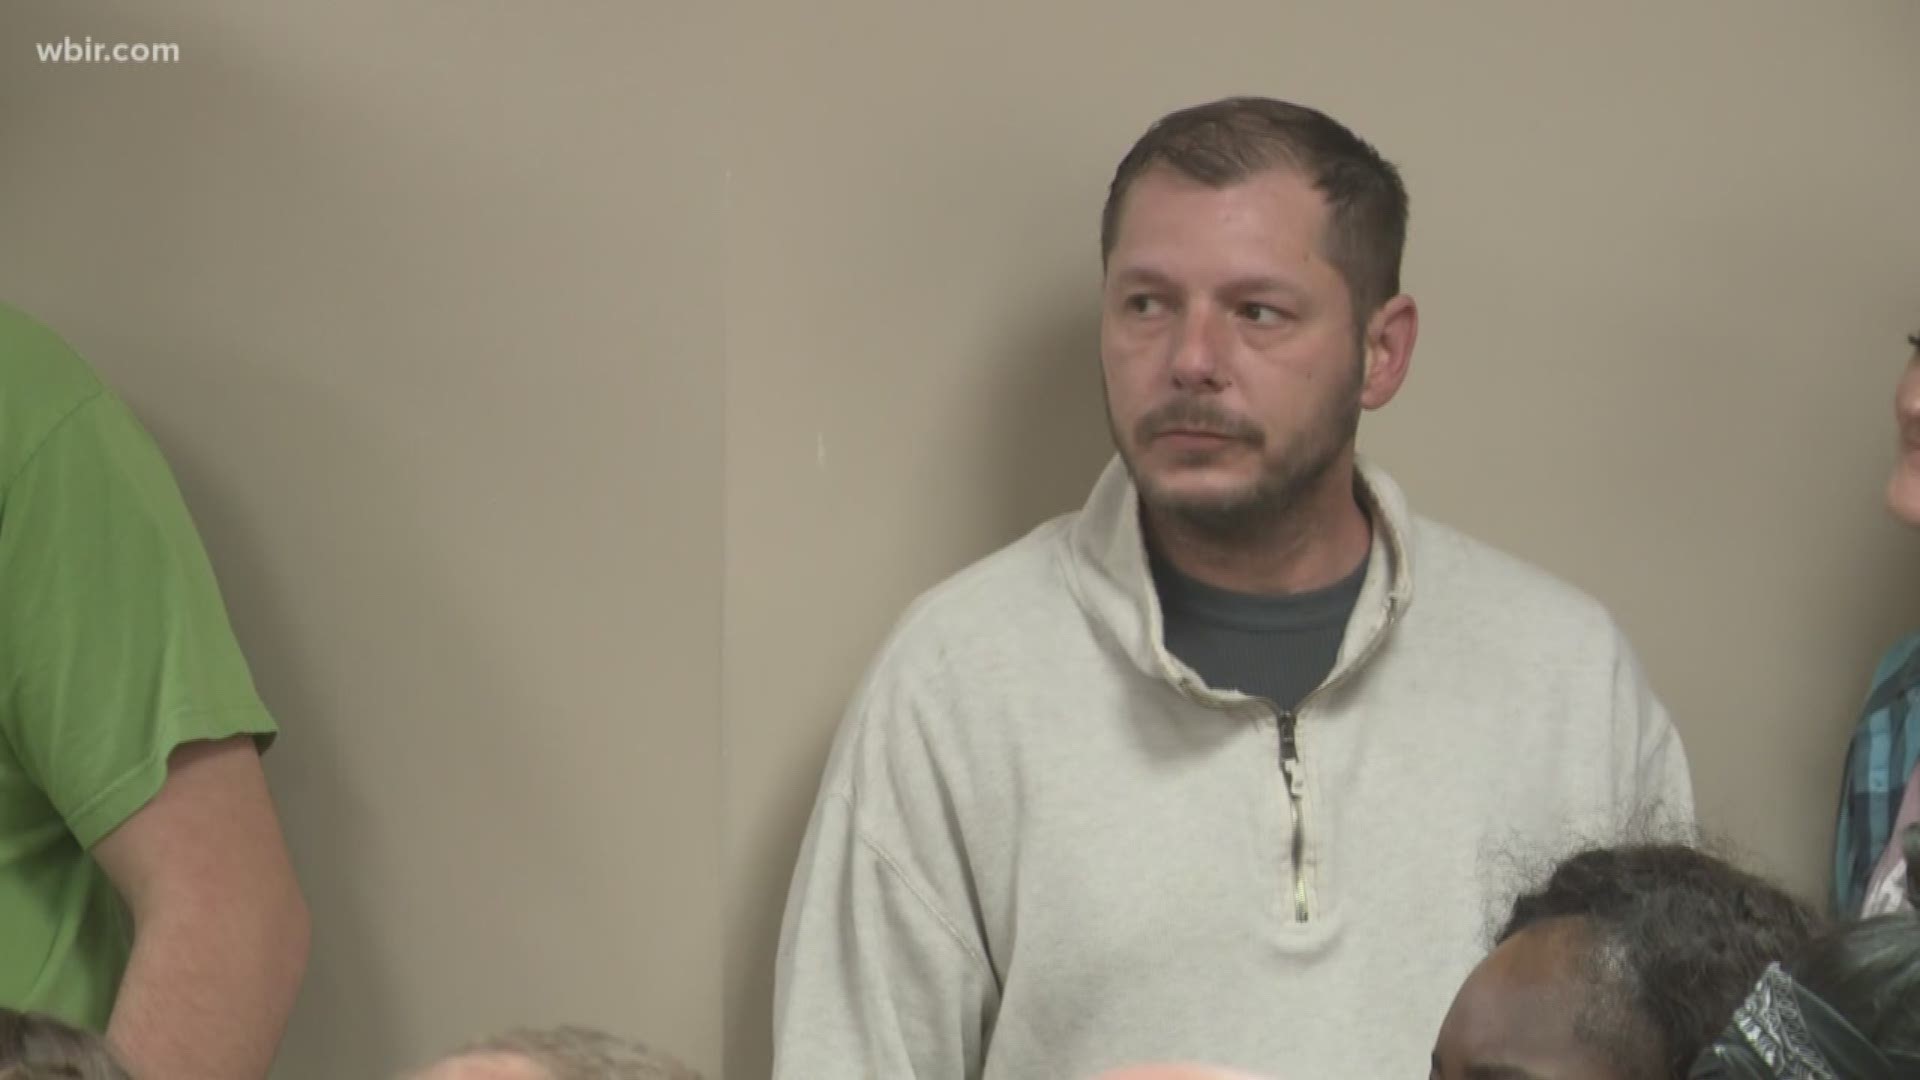 One of the men accused of driving around with pipe bombs in a car in Sevier County appeared in court today.